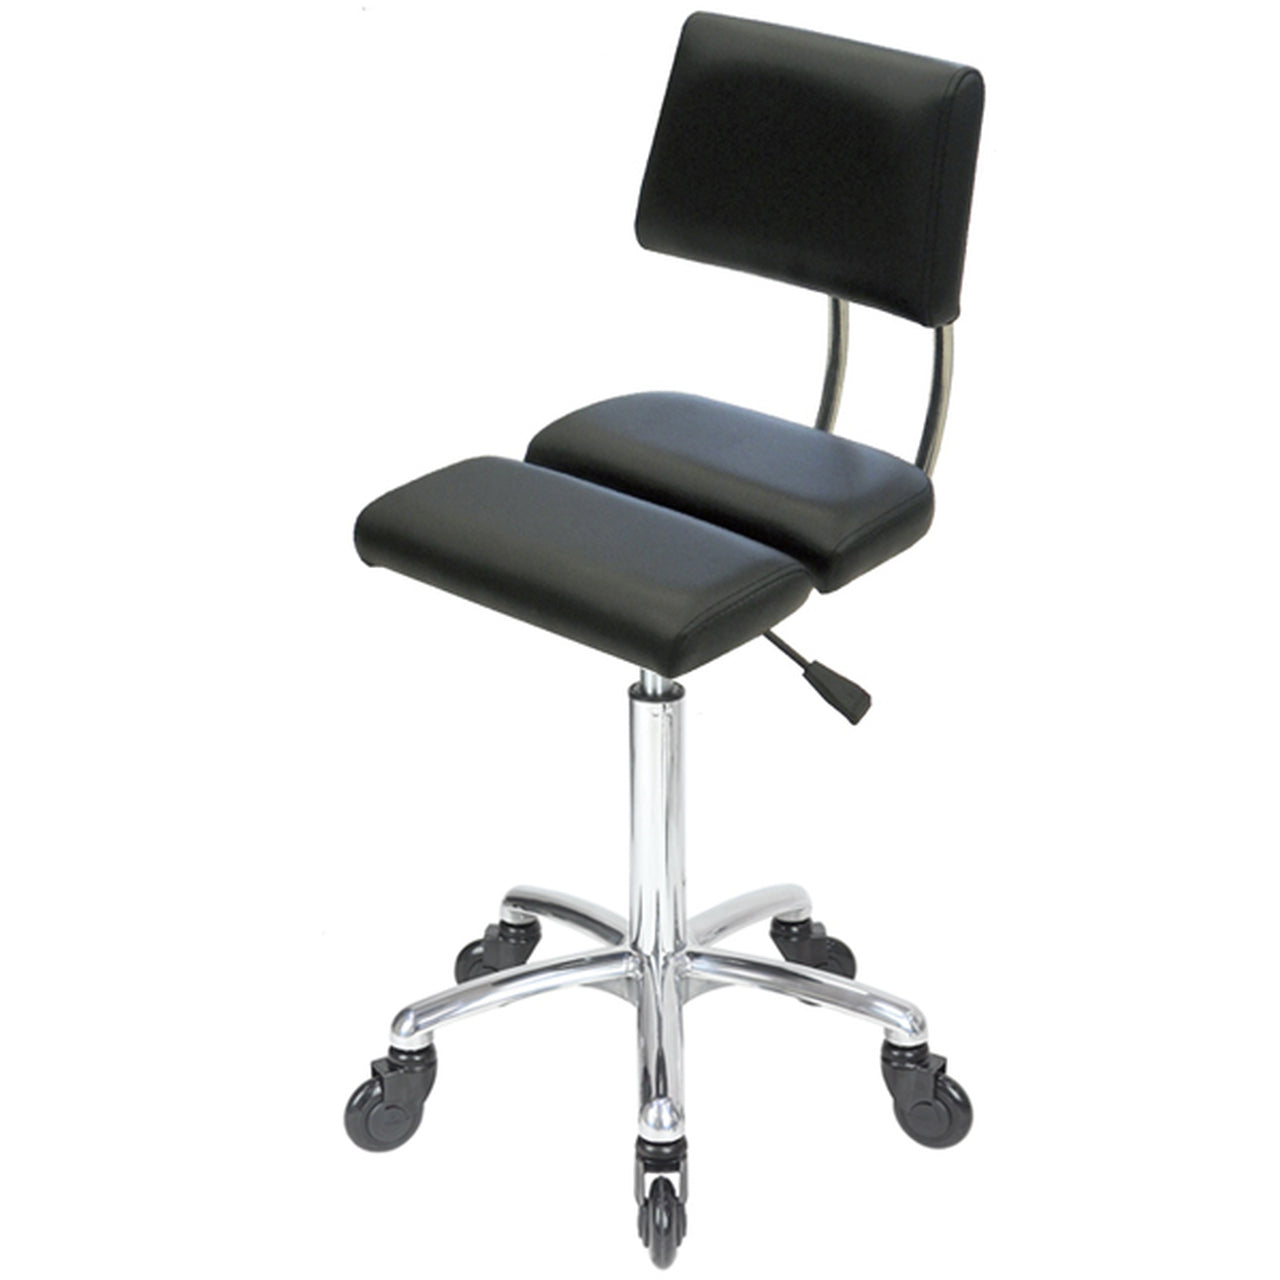 Dove - Chrome - (Black Upholstery)   With CLICK'NCLEAN Castors